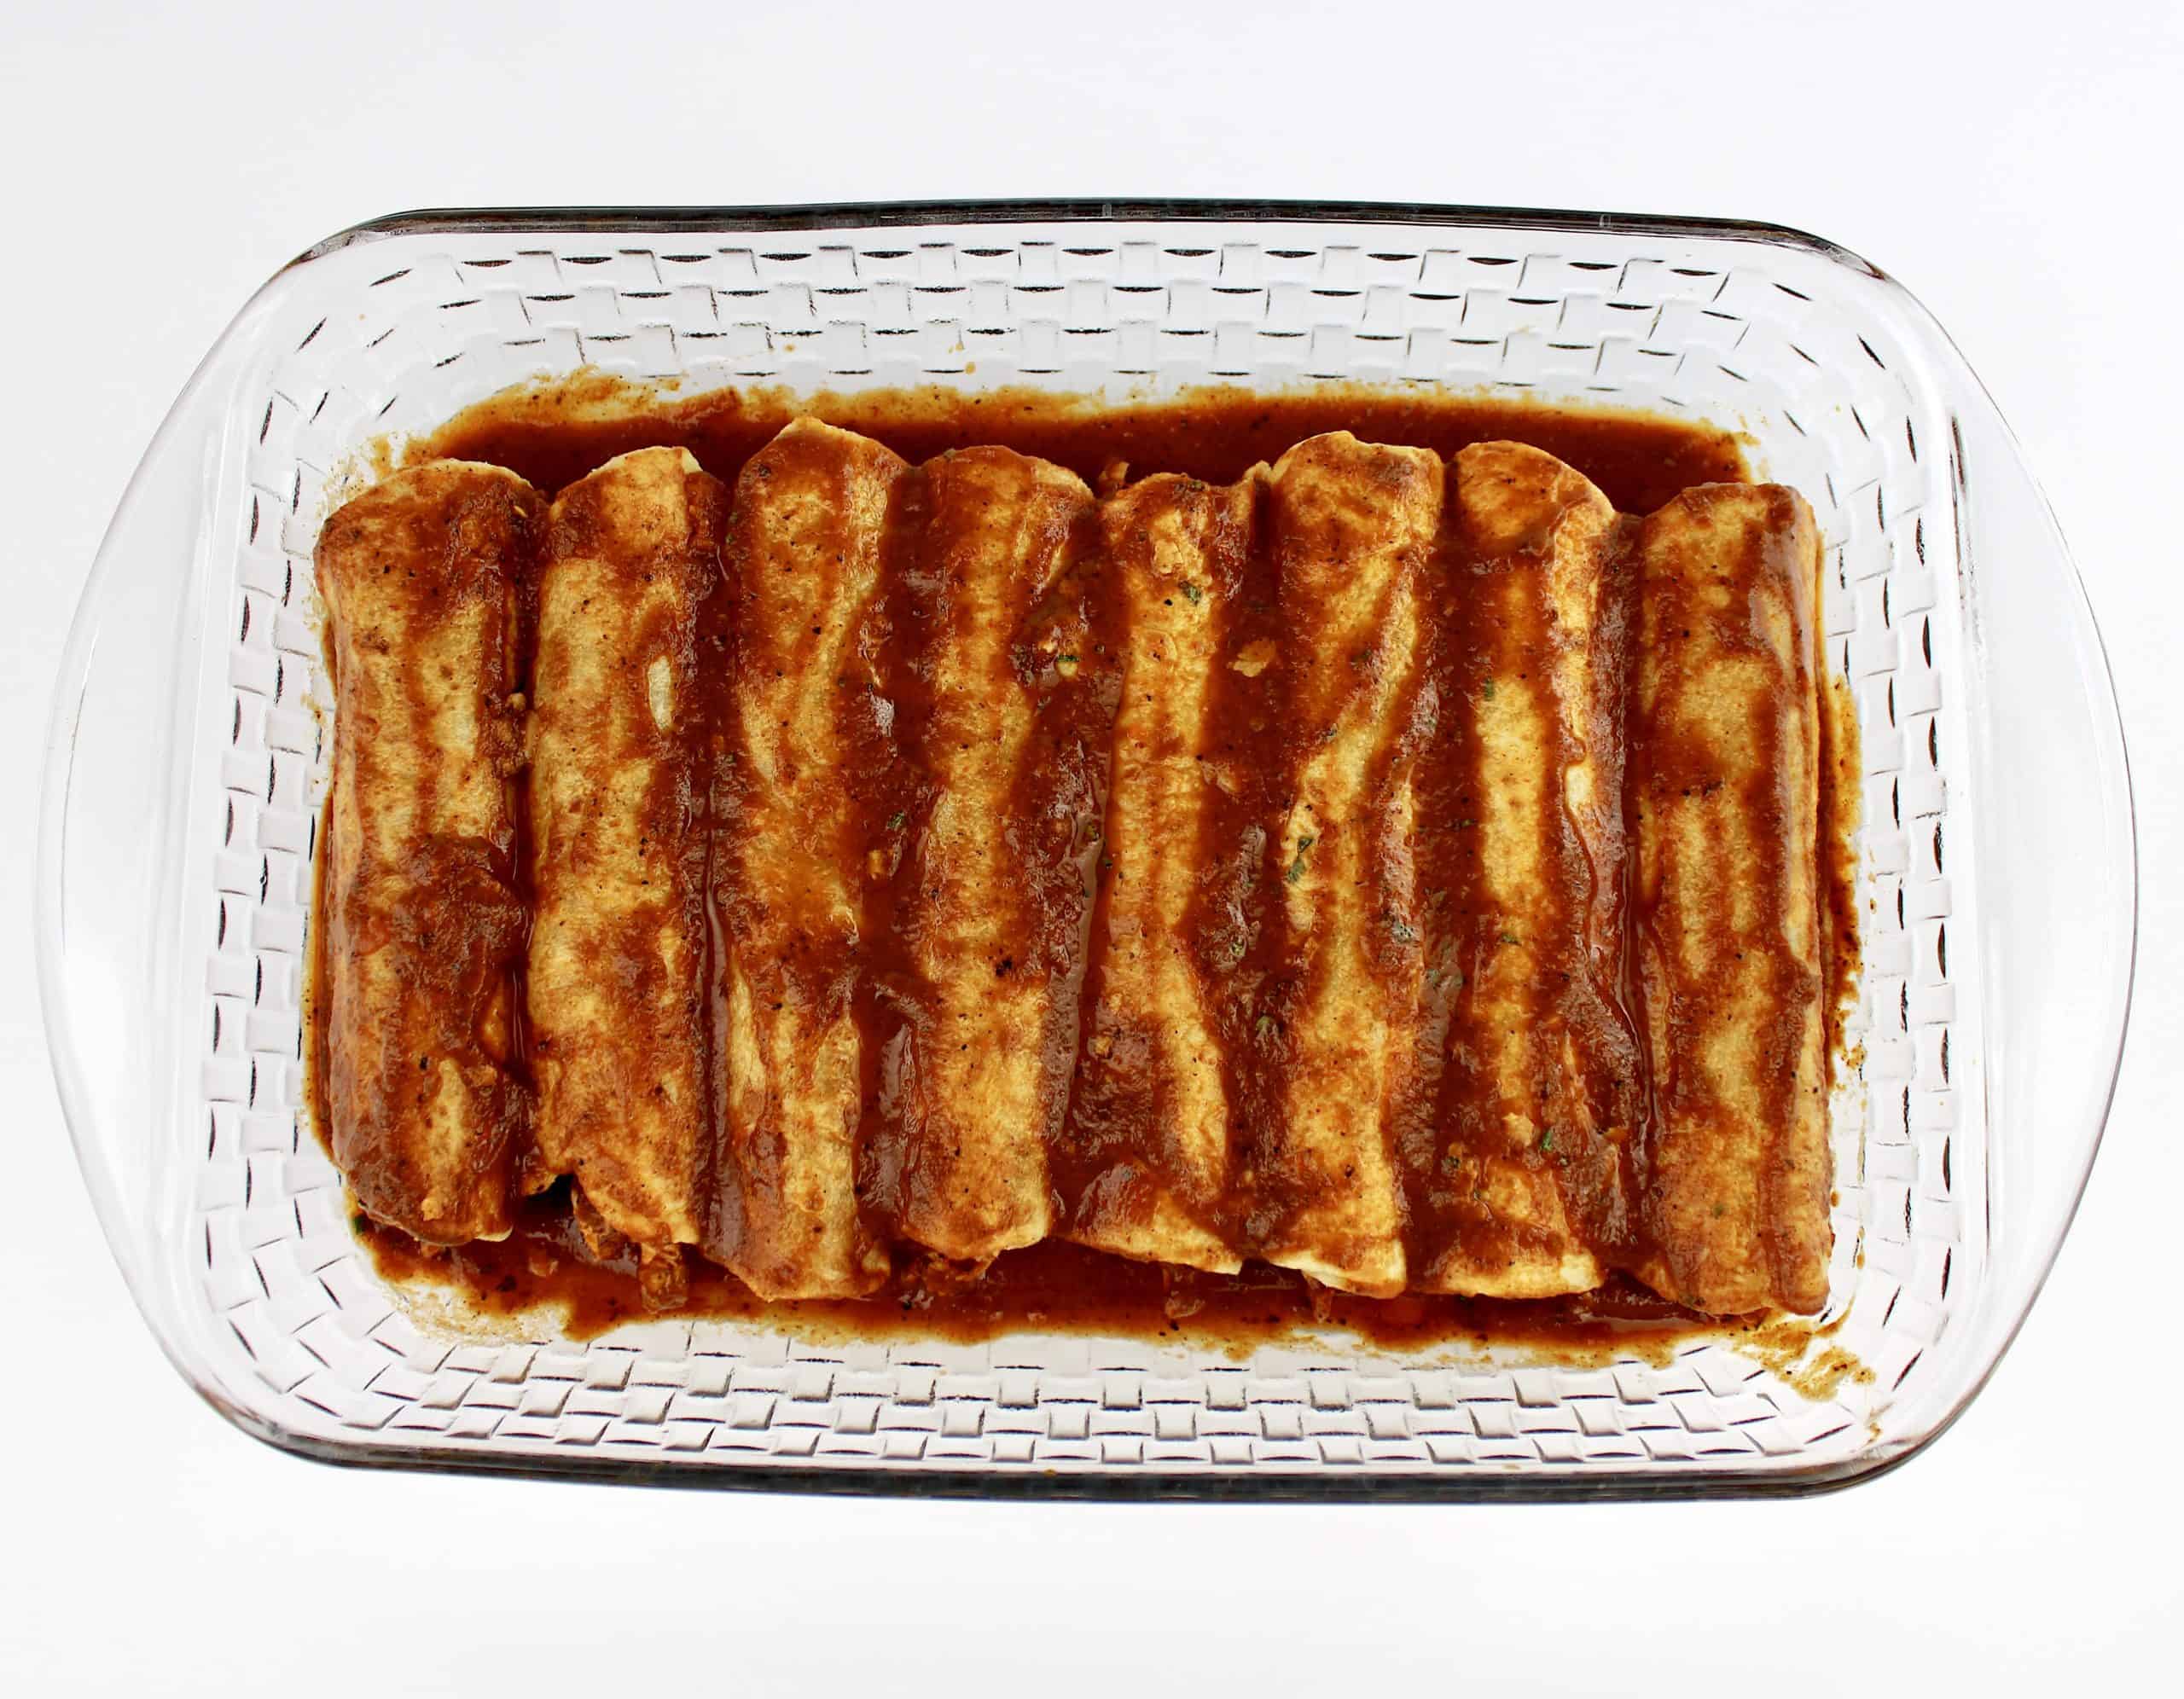 8 Chicken Enchiladas inn glass dish with sauce over the tops